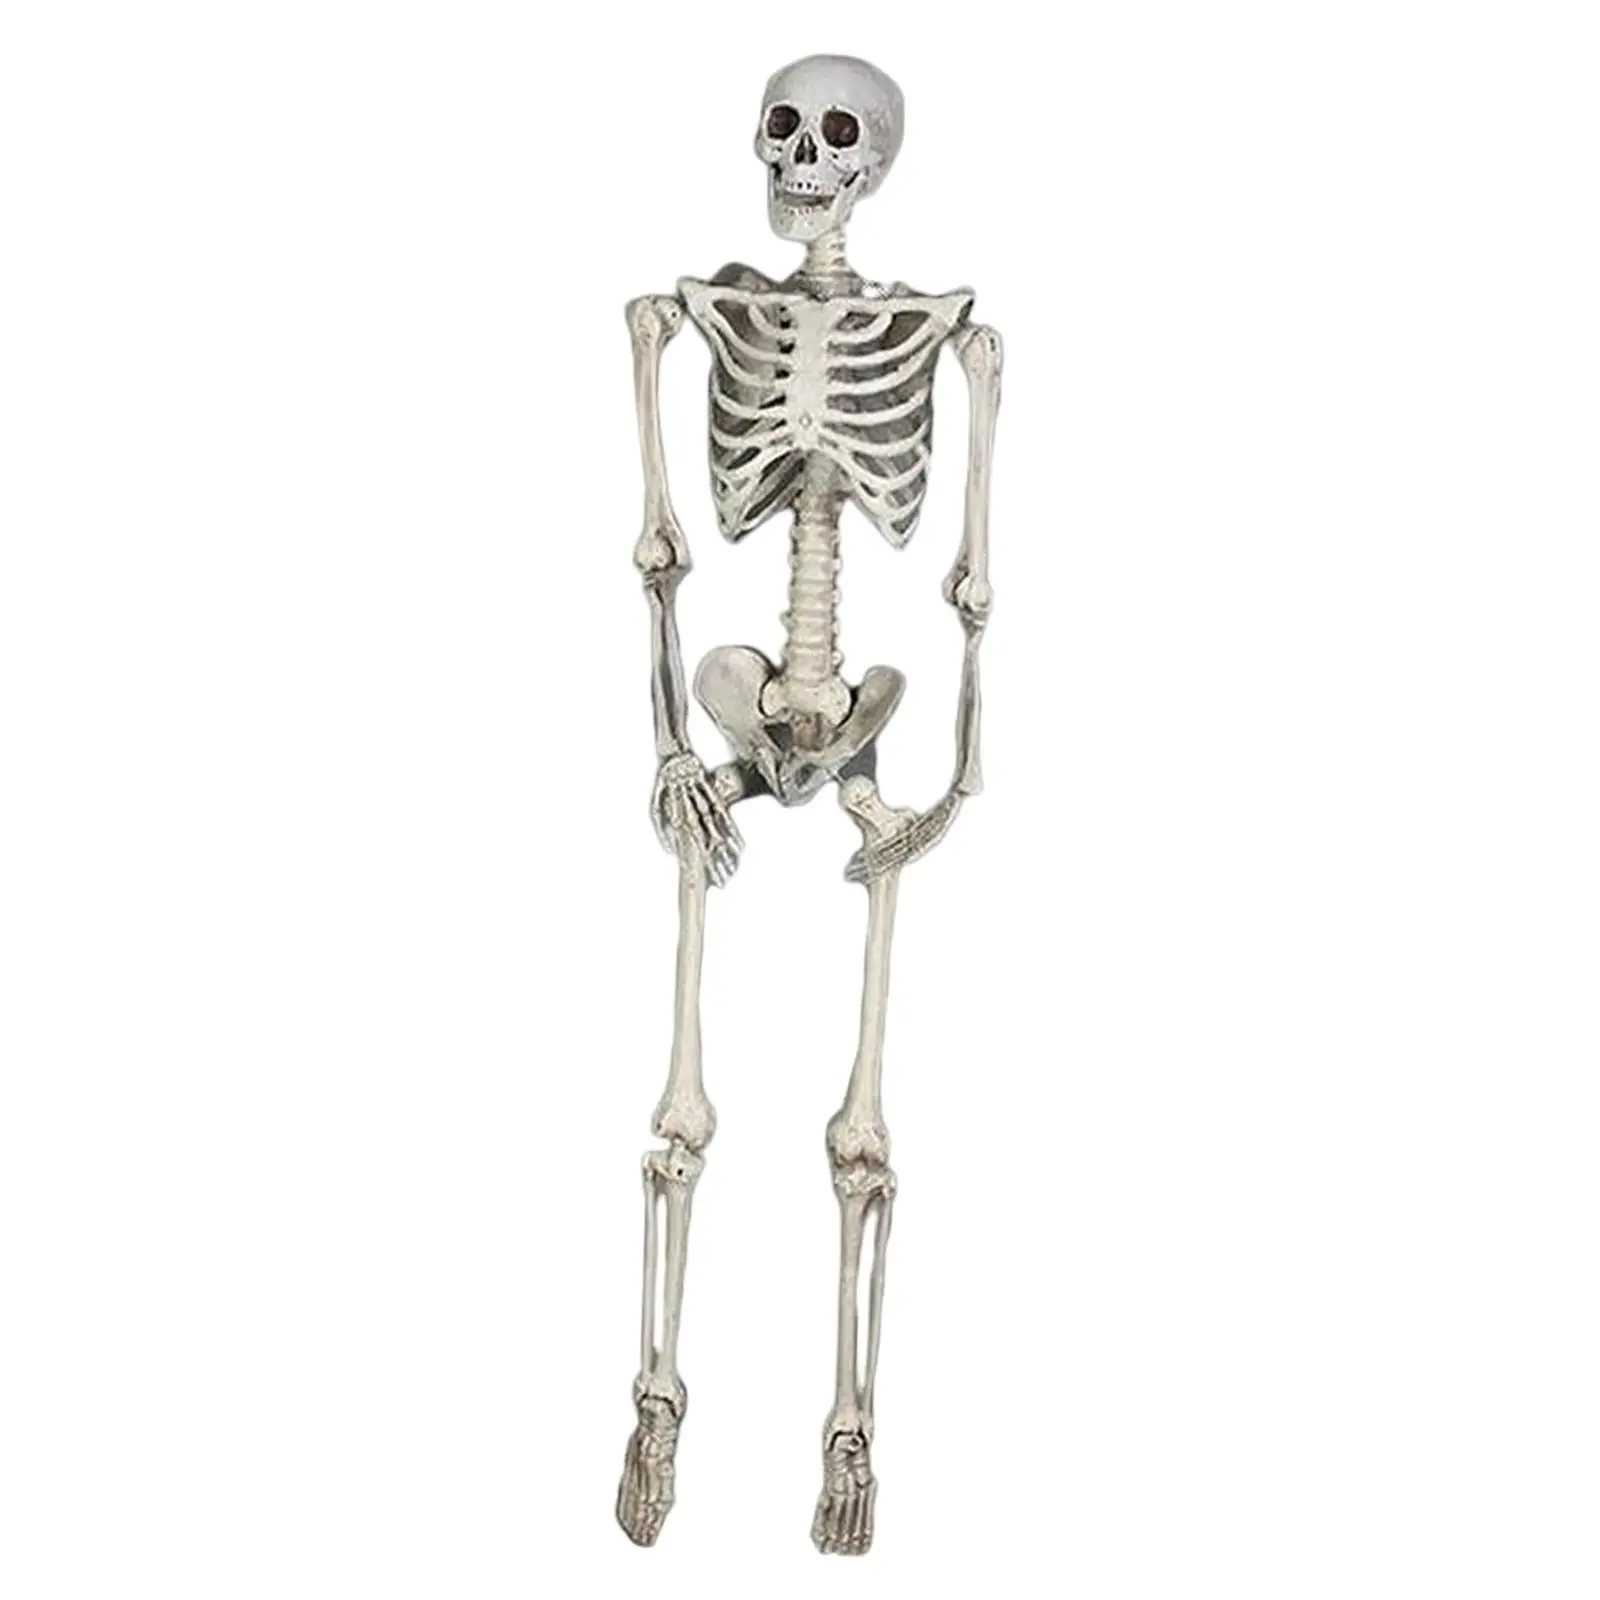 185cm Simulation Skeleton Novelty Decor Scene Layout Accessories Gifts Collectibles Halloween Props for Parties Haunted House